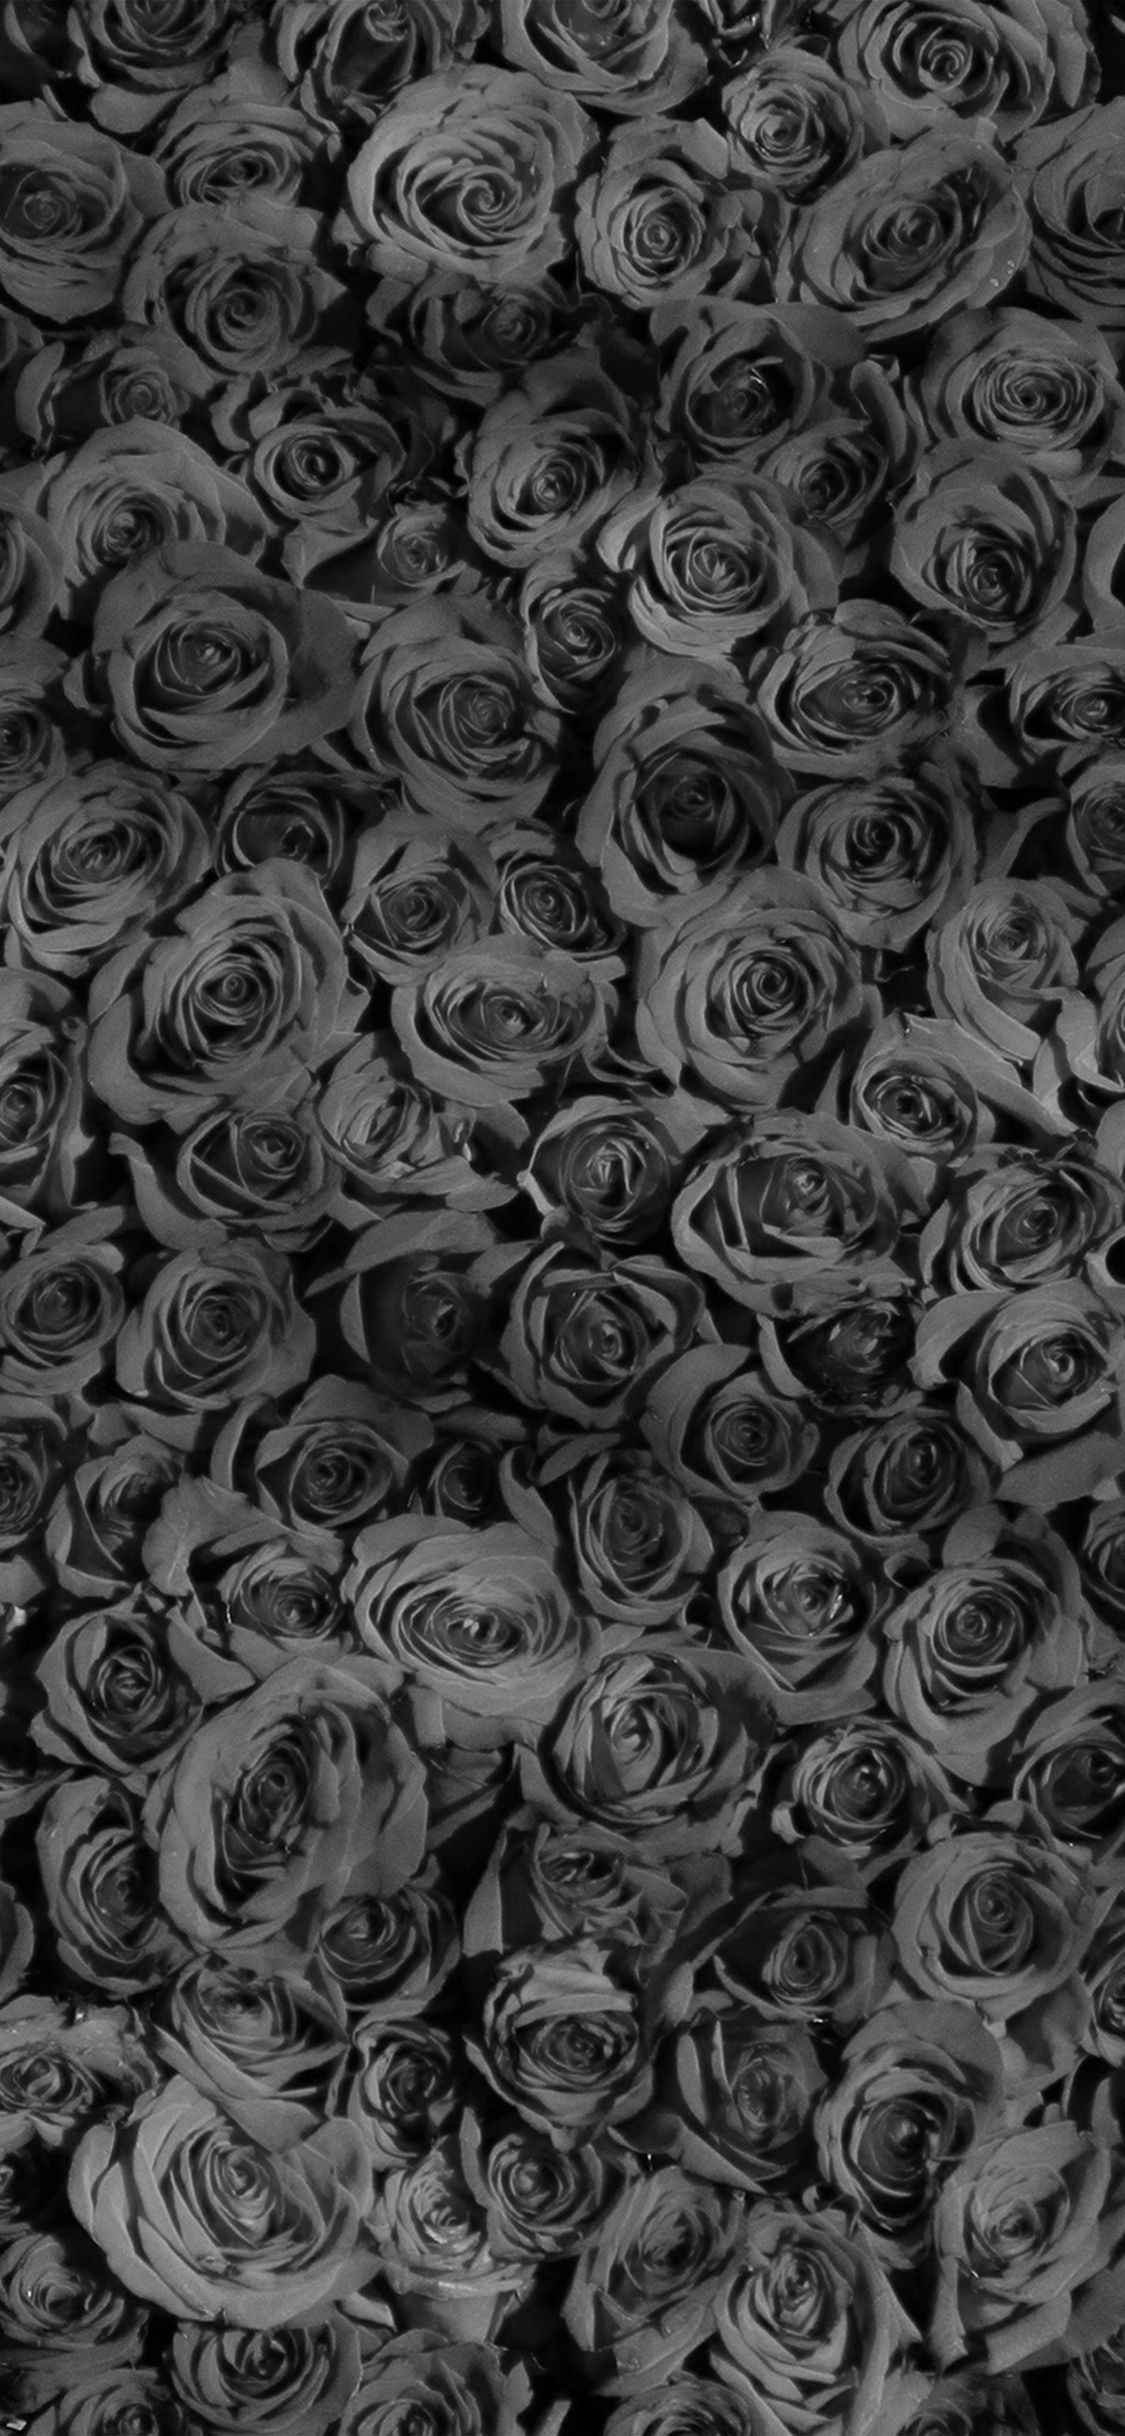 Black and white roses wallpaper for your phone or desktop. - Gothic, gray, roses